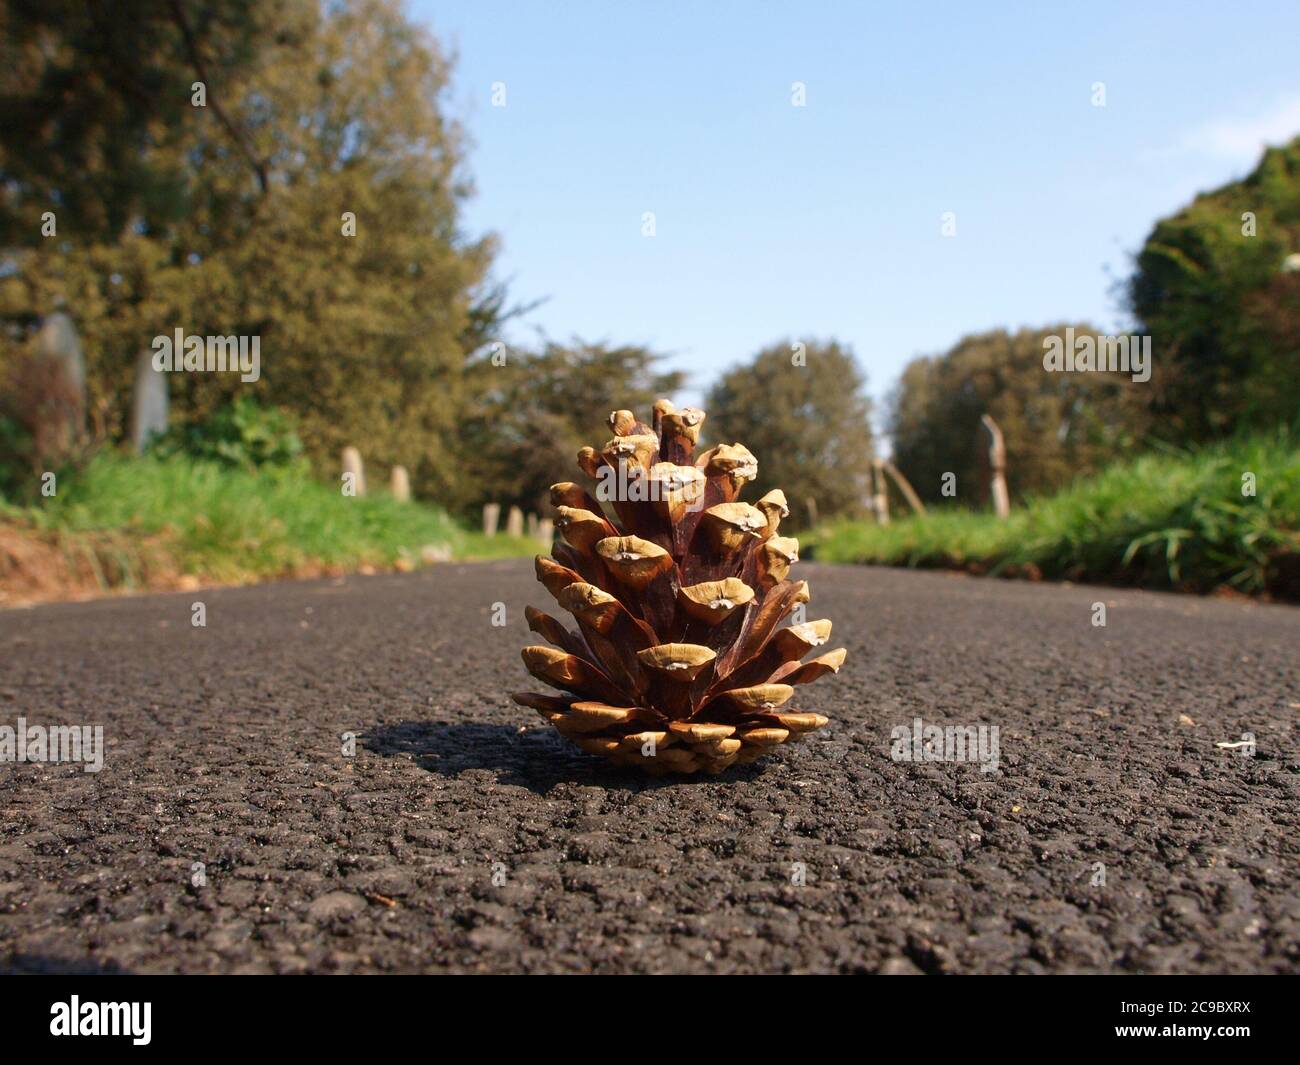 Pine cone on a path Stock Photo